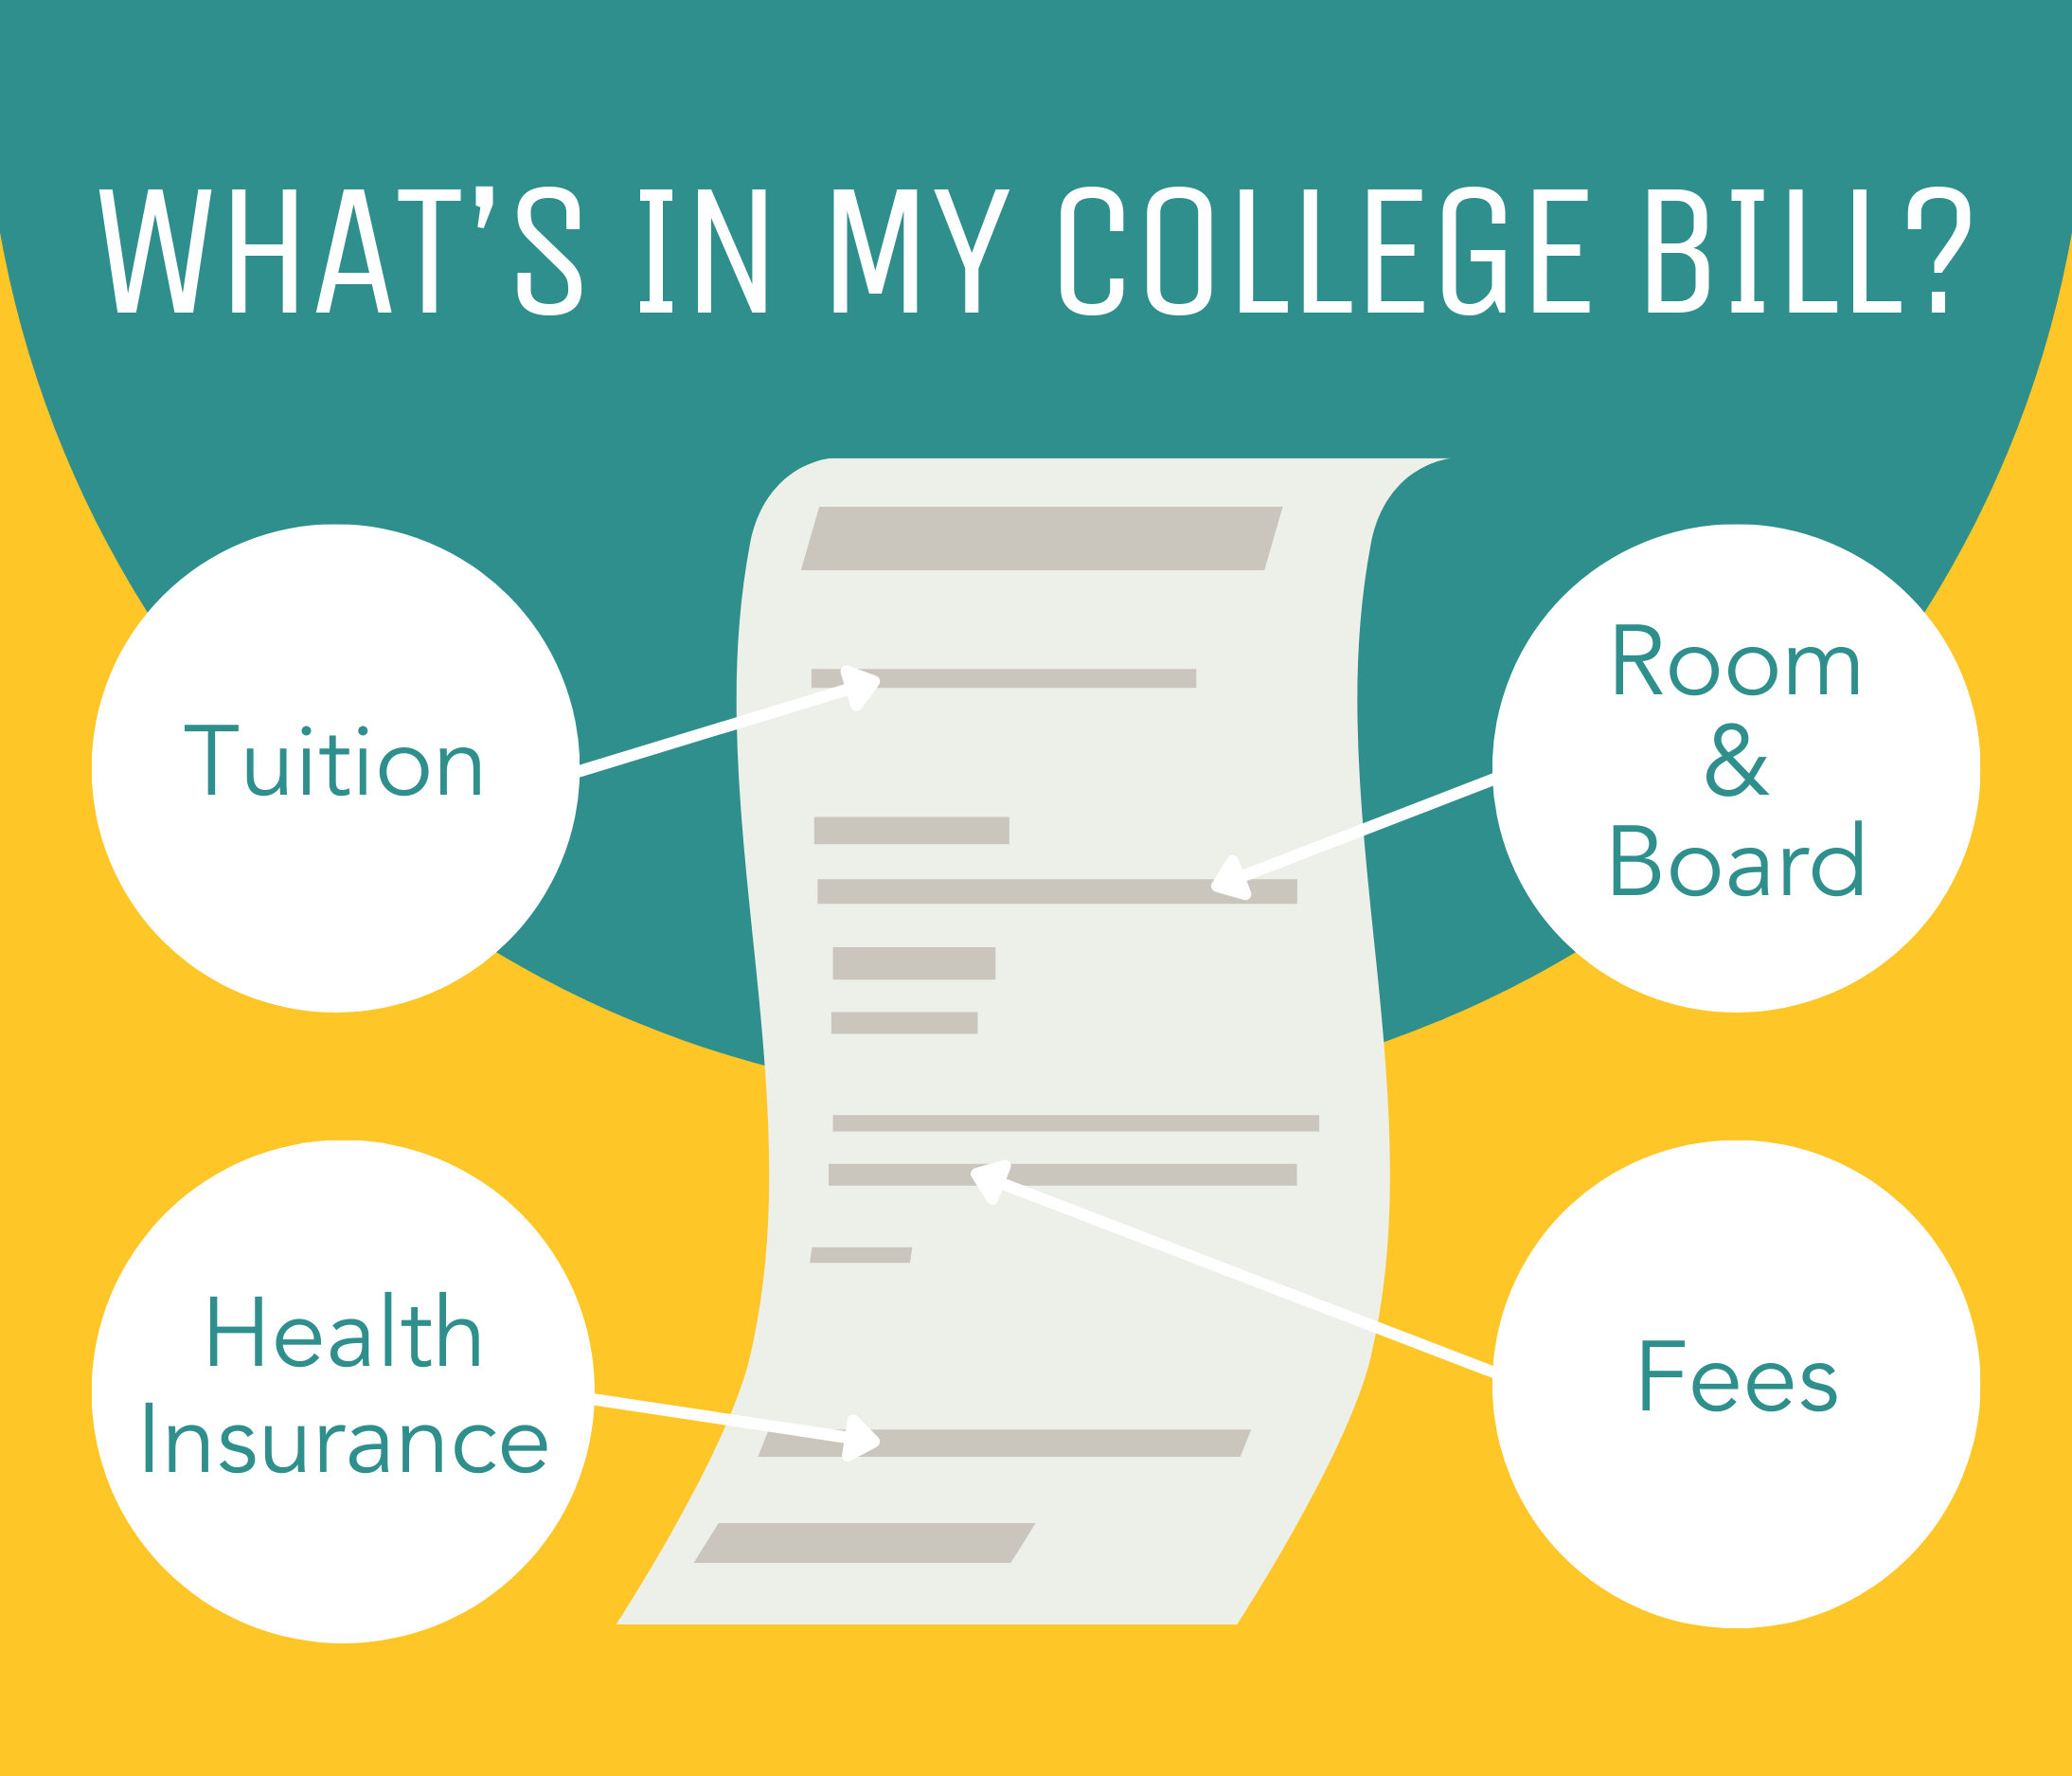 What's in my college bill infographic